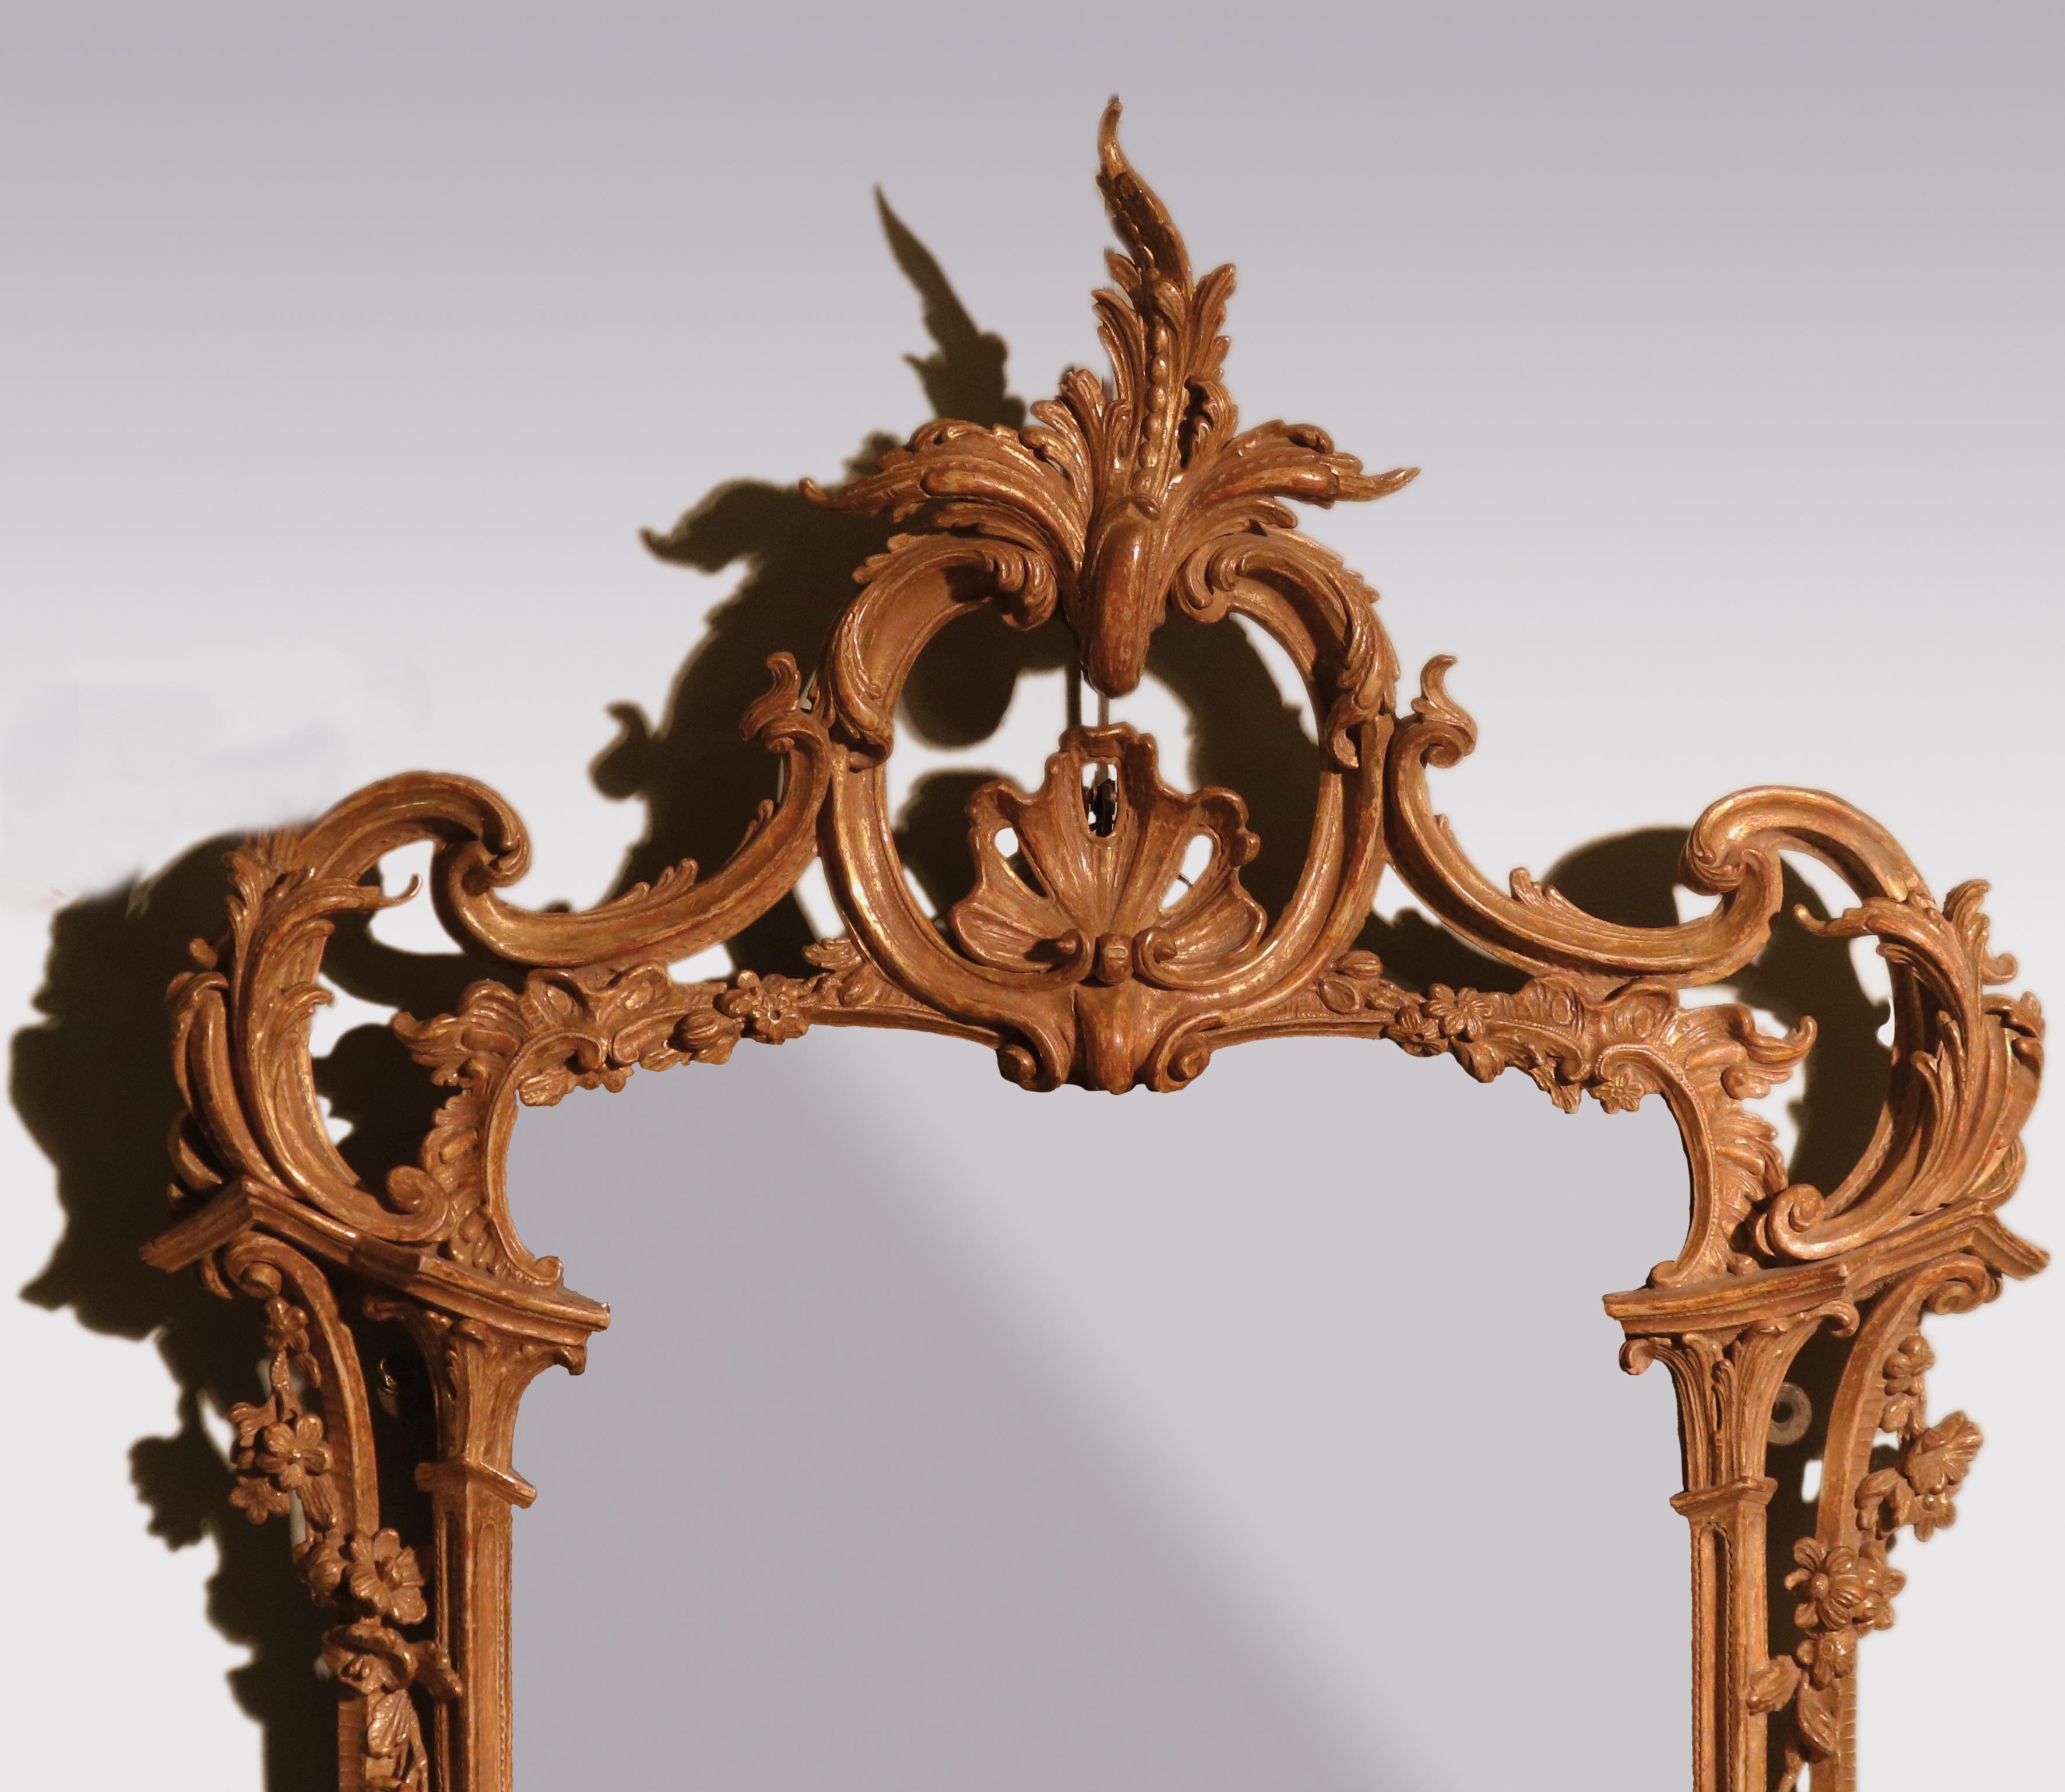 A fine quality crisply carved Mid-18th Century giltwood Mirror, having c-scroll acanthus and flower decoration throughout, contained in 'Chinese pagoda' frame.